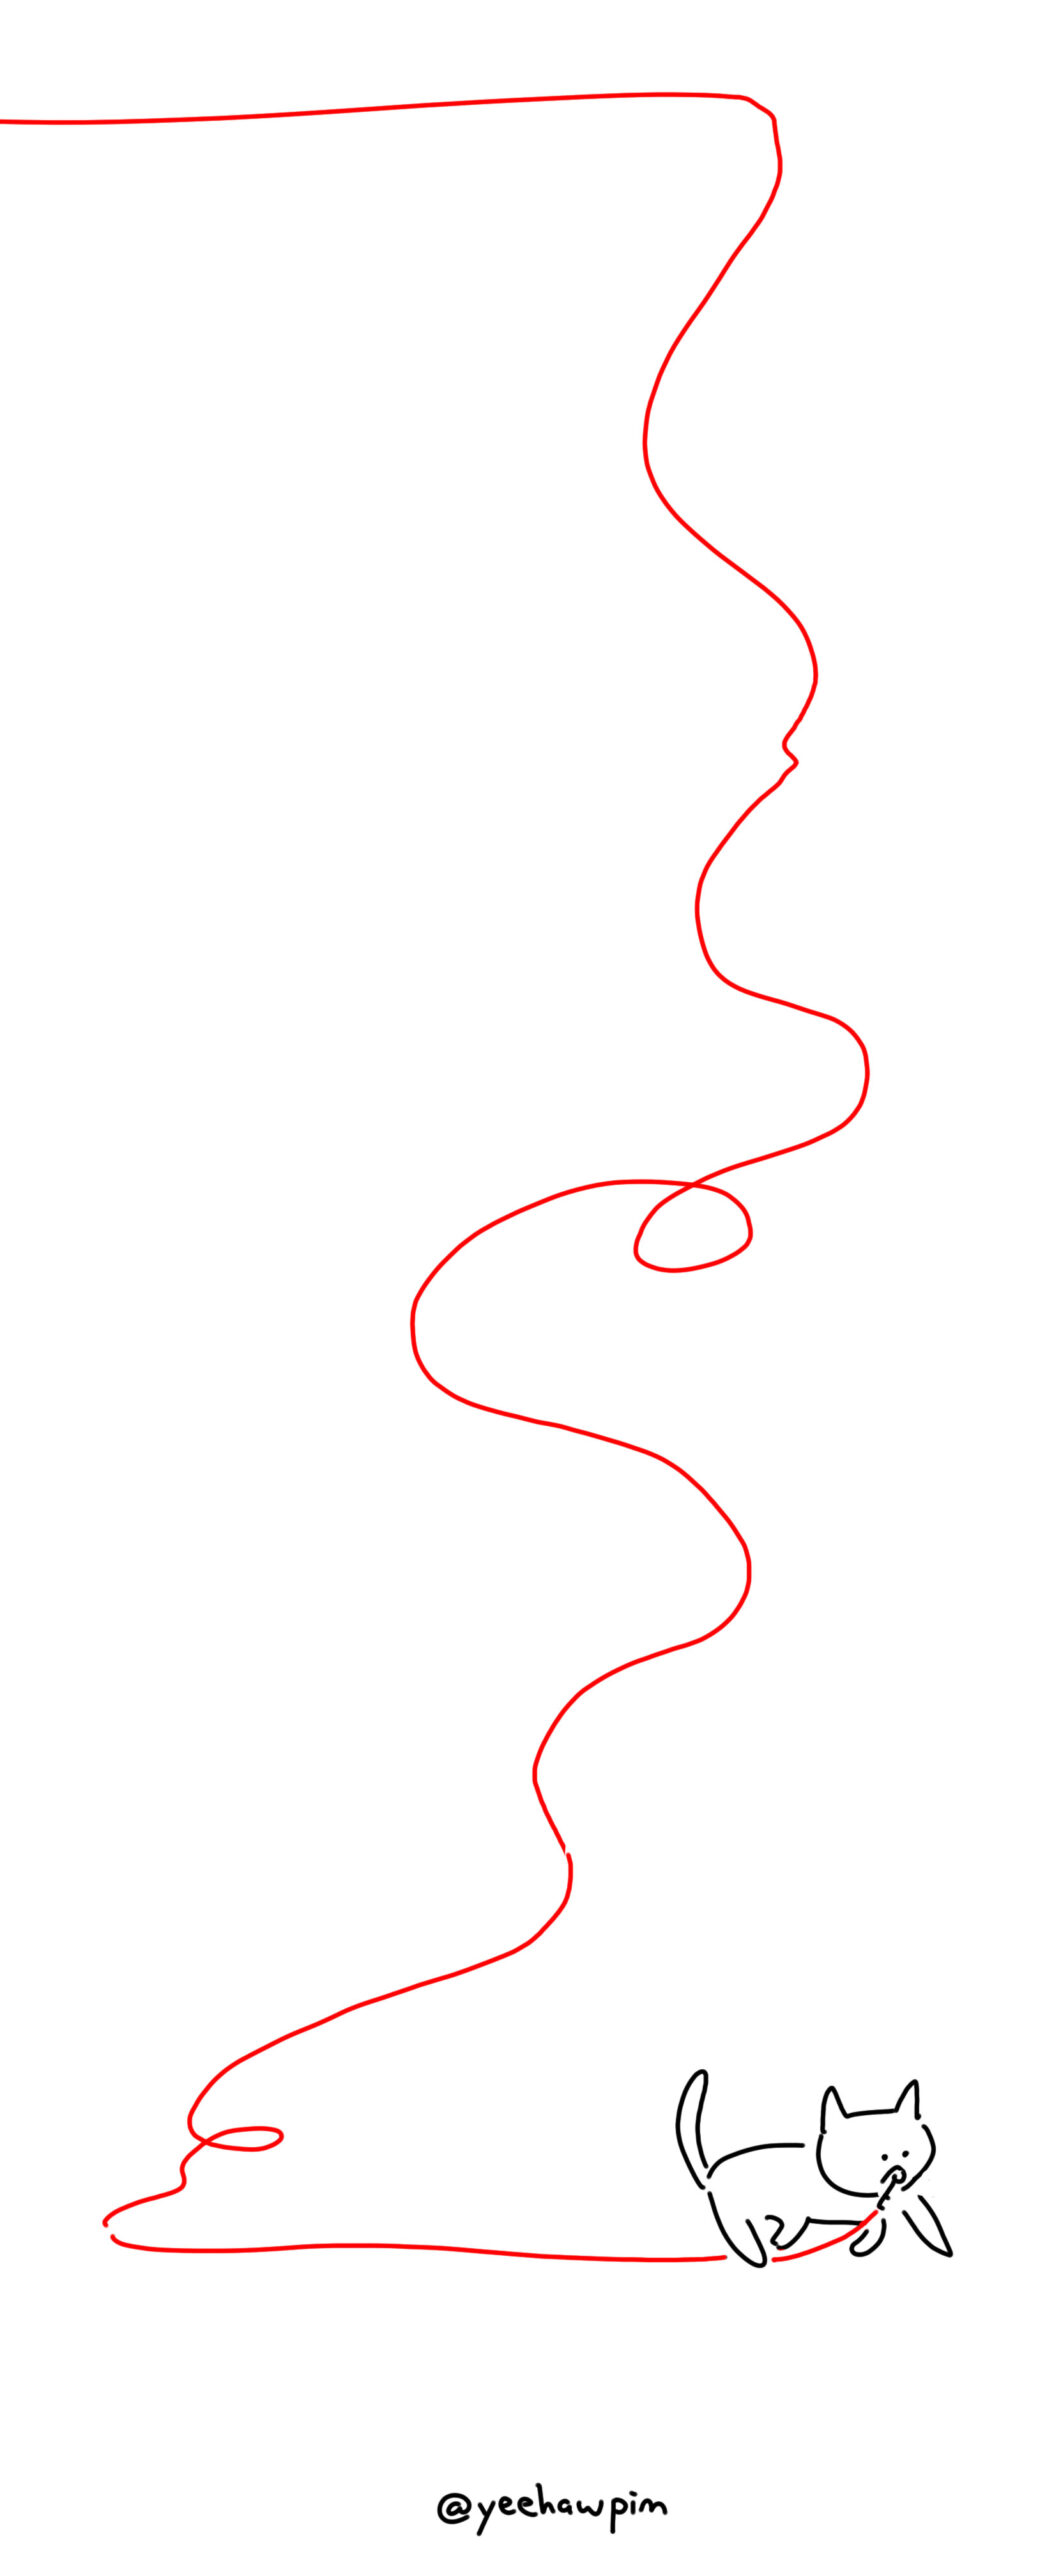 Panel 5: Red string emerges from the left side of the page and trails down, looping twice and laying in squiggly shapes. It ends in the cat walking to the right of the page, still with the key in it's frowning mouth. Watermark on the bottom center of the page: @yeehawpim